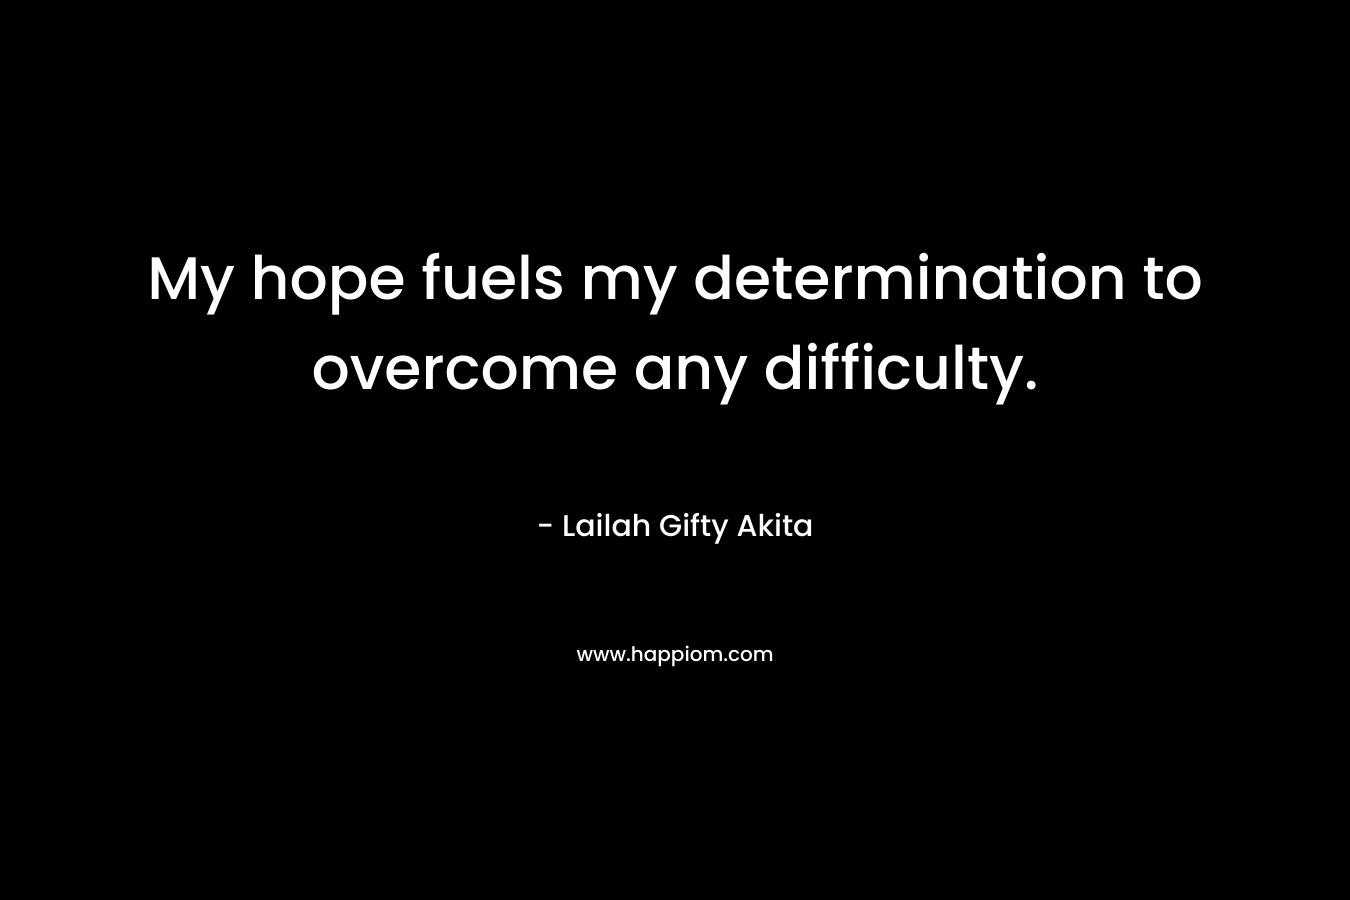 My hope fuels my determination to overcome any difficulty.